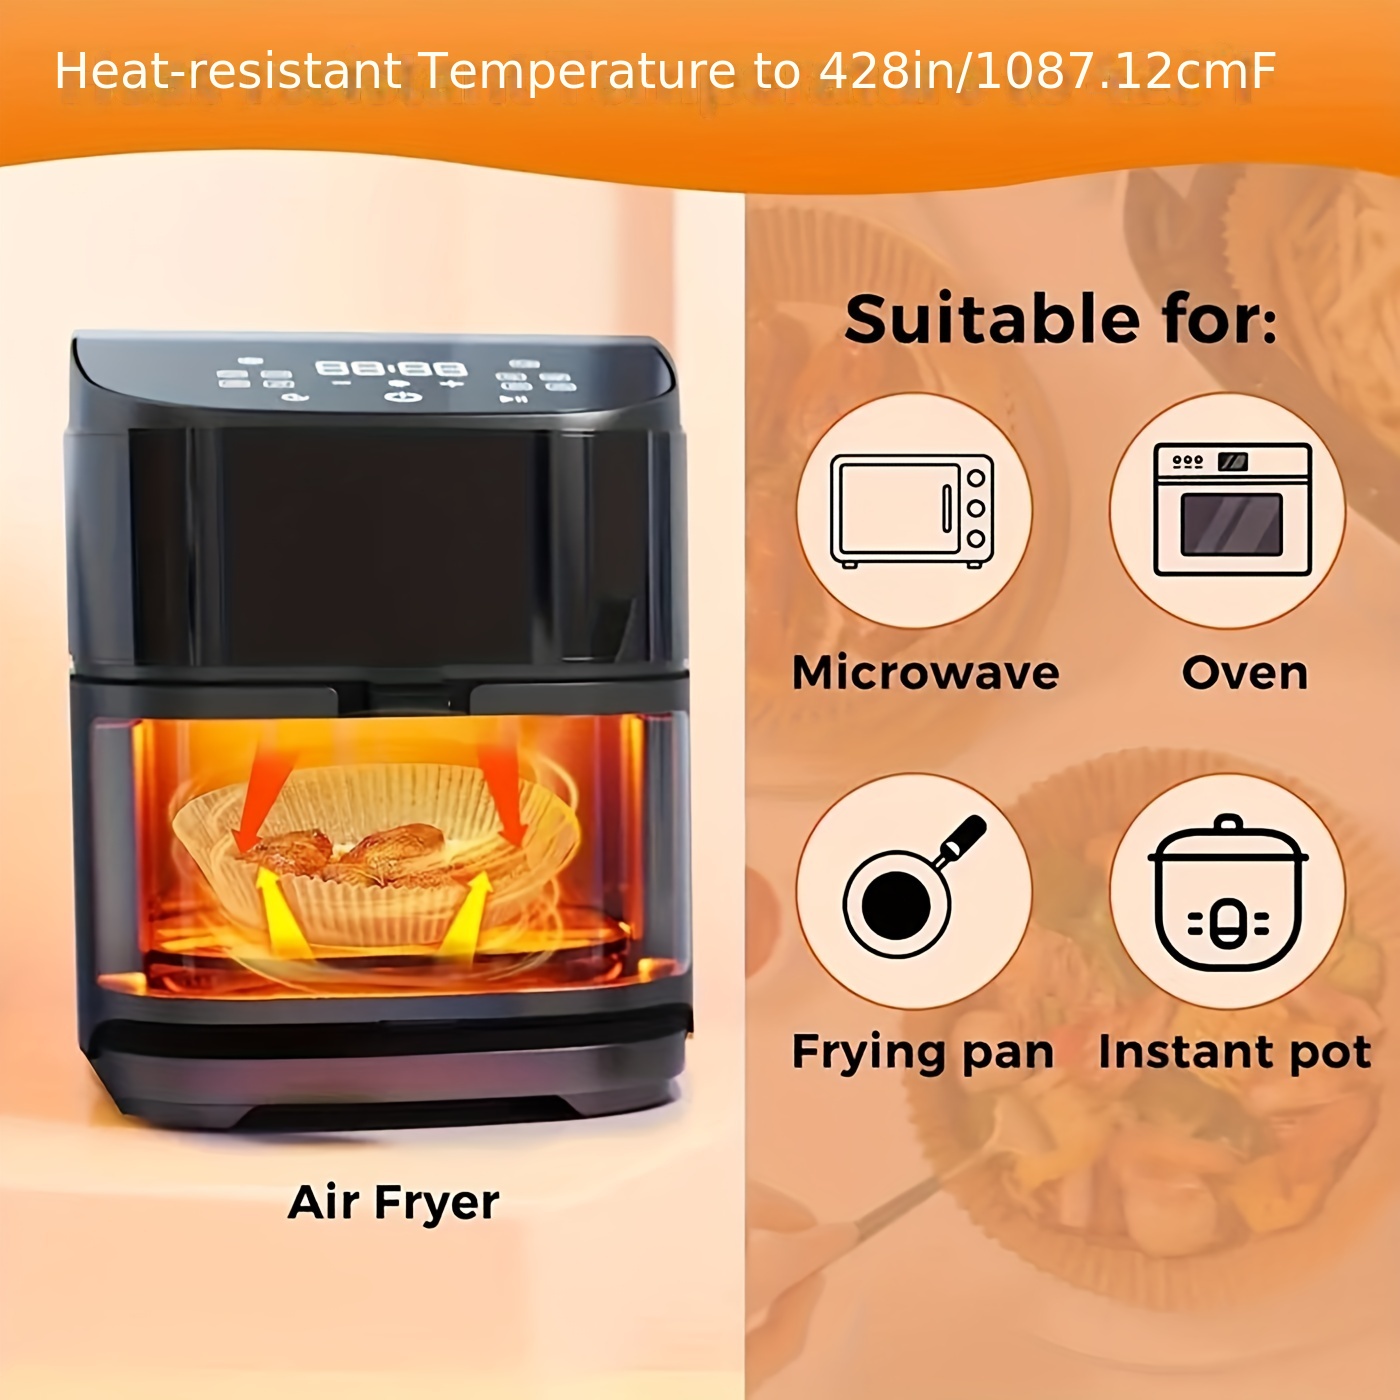 https://img.kwcdn.com/product/fancyalgo/toaster-api/toaster-processor-image-cm2in/4c7febea-2057-11ee-a7a4-0a580a6975ad.jpg?imageMogr2/auto-orient%7CimageView2/2/w/800/q/70/format/webp